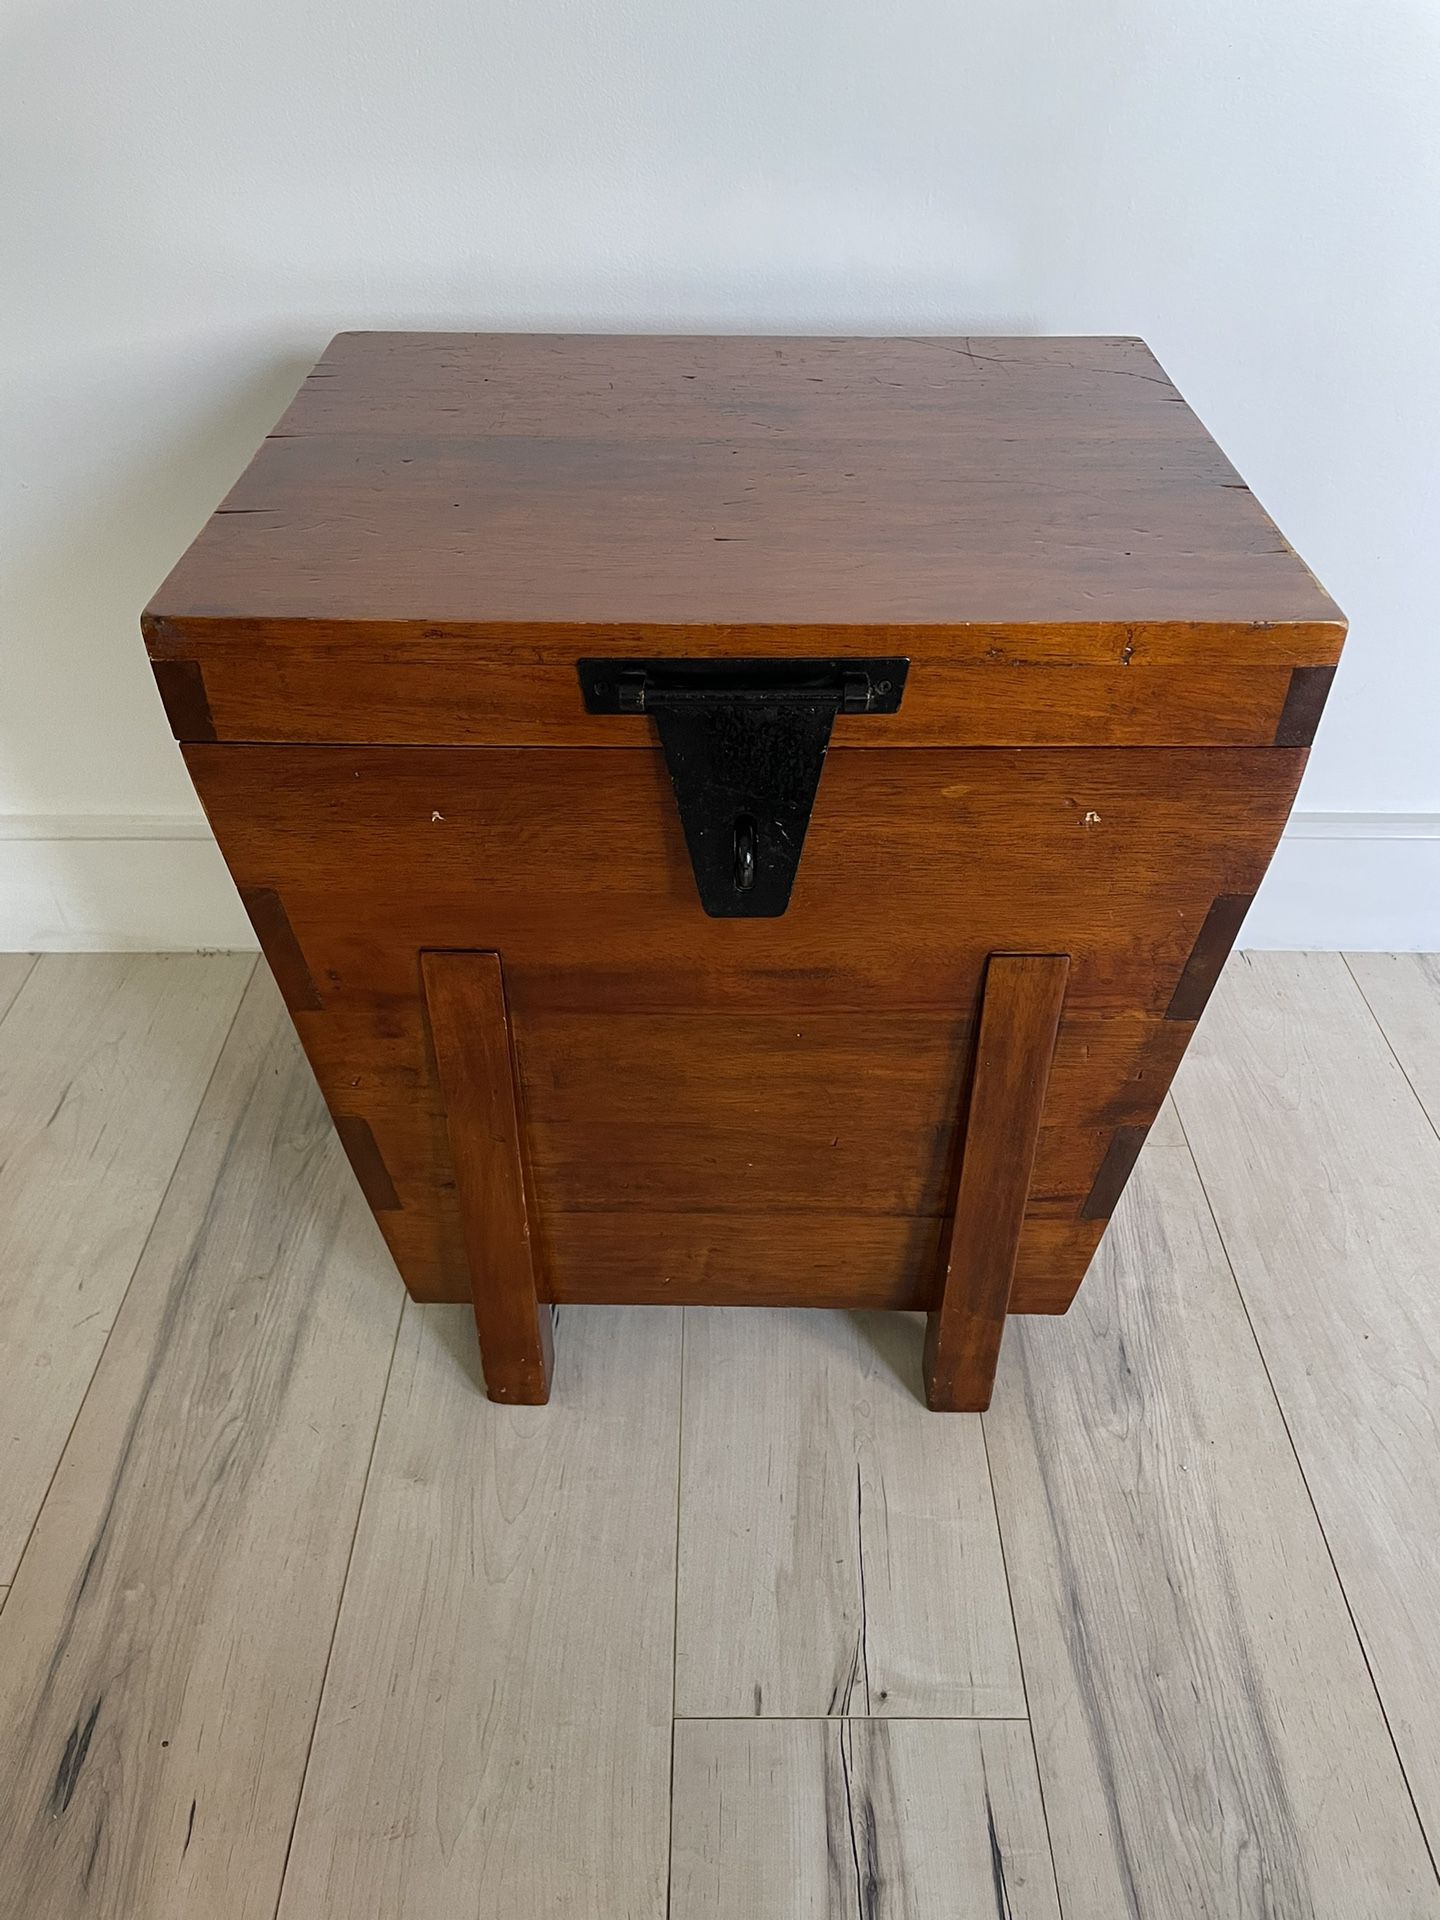 Beautiful Solid Wood Storage Chest/ End Table